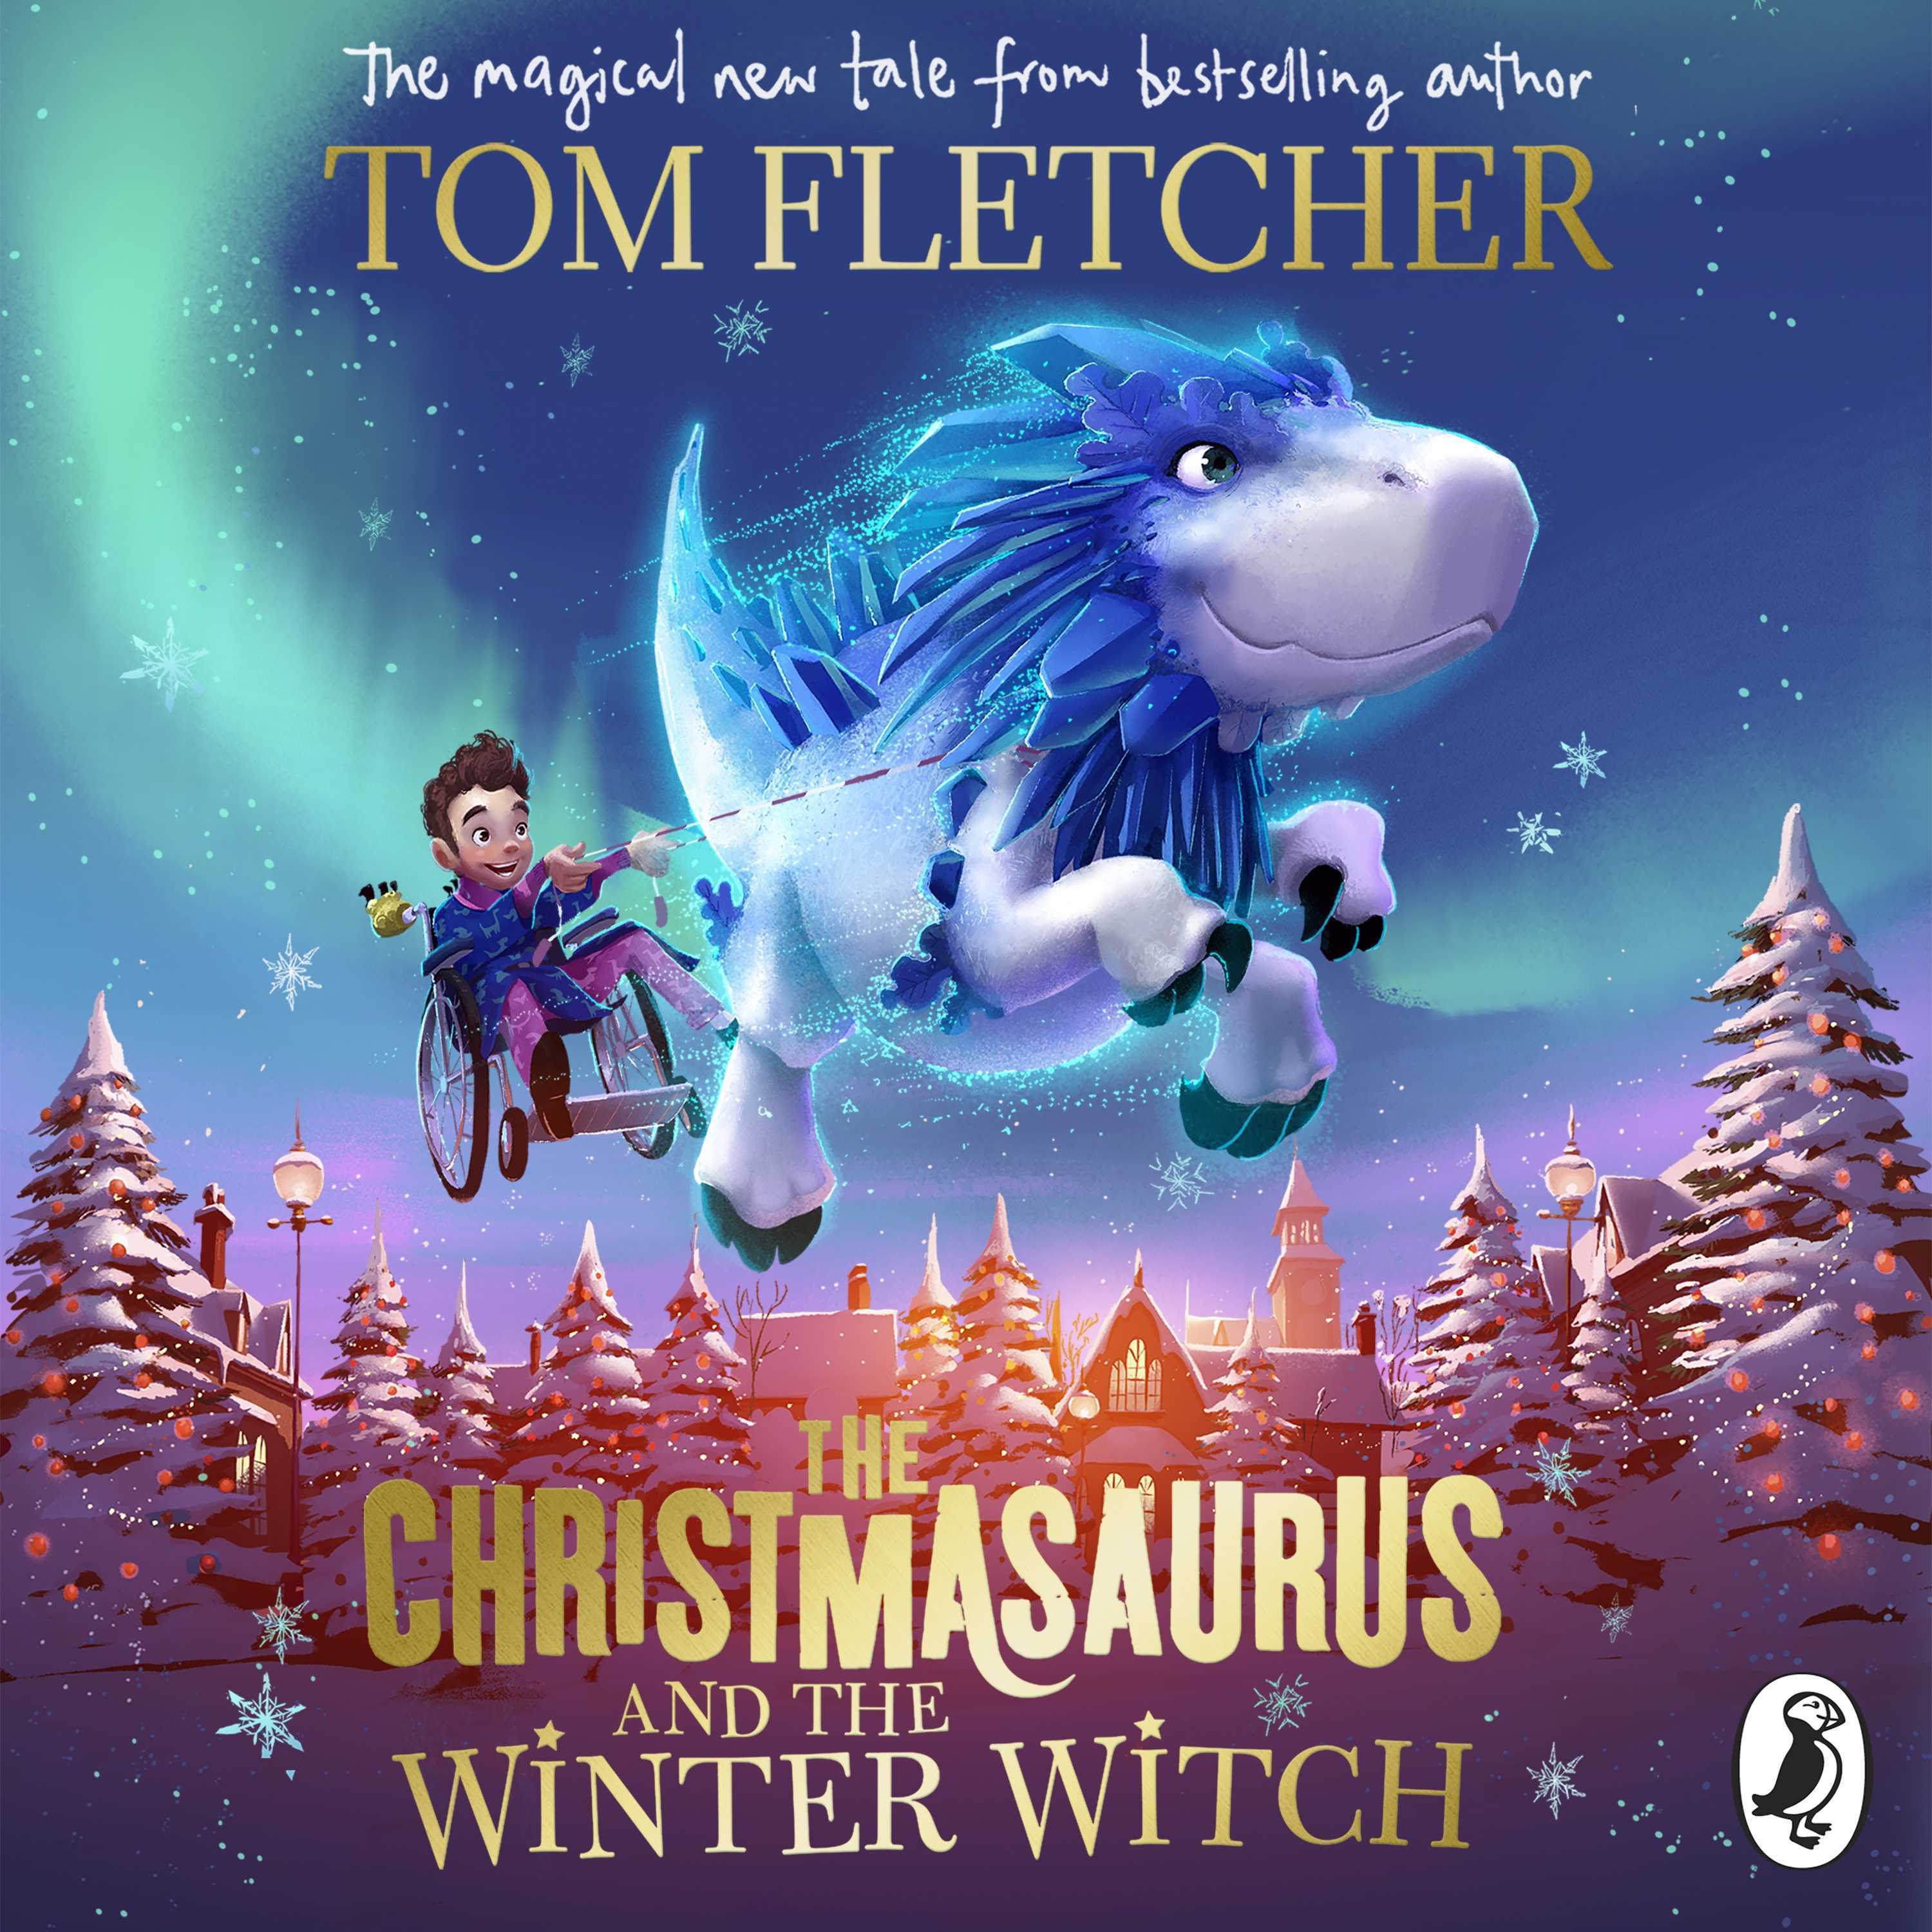 The Christmasaurus and the Winter Witch (CD Audiobook)